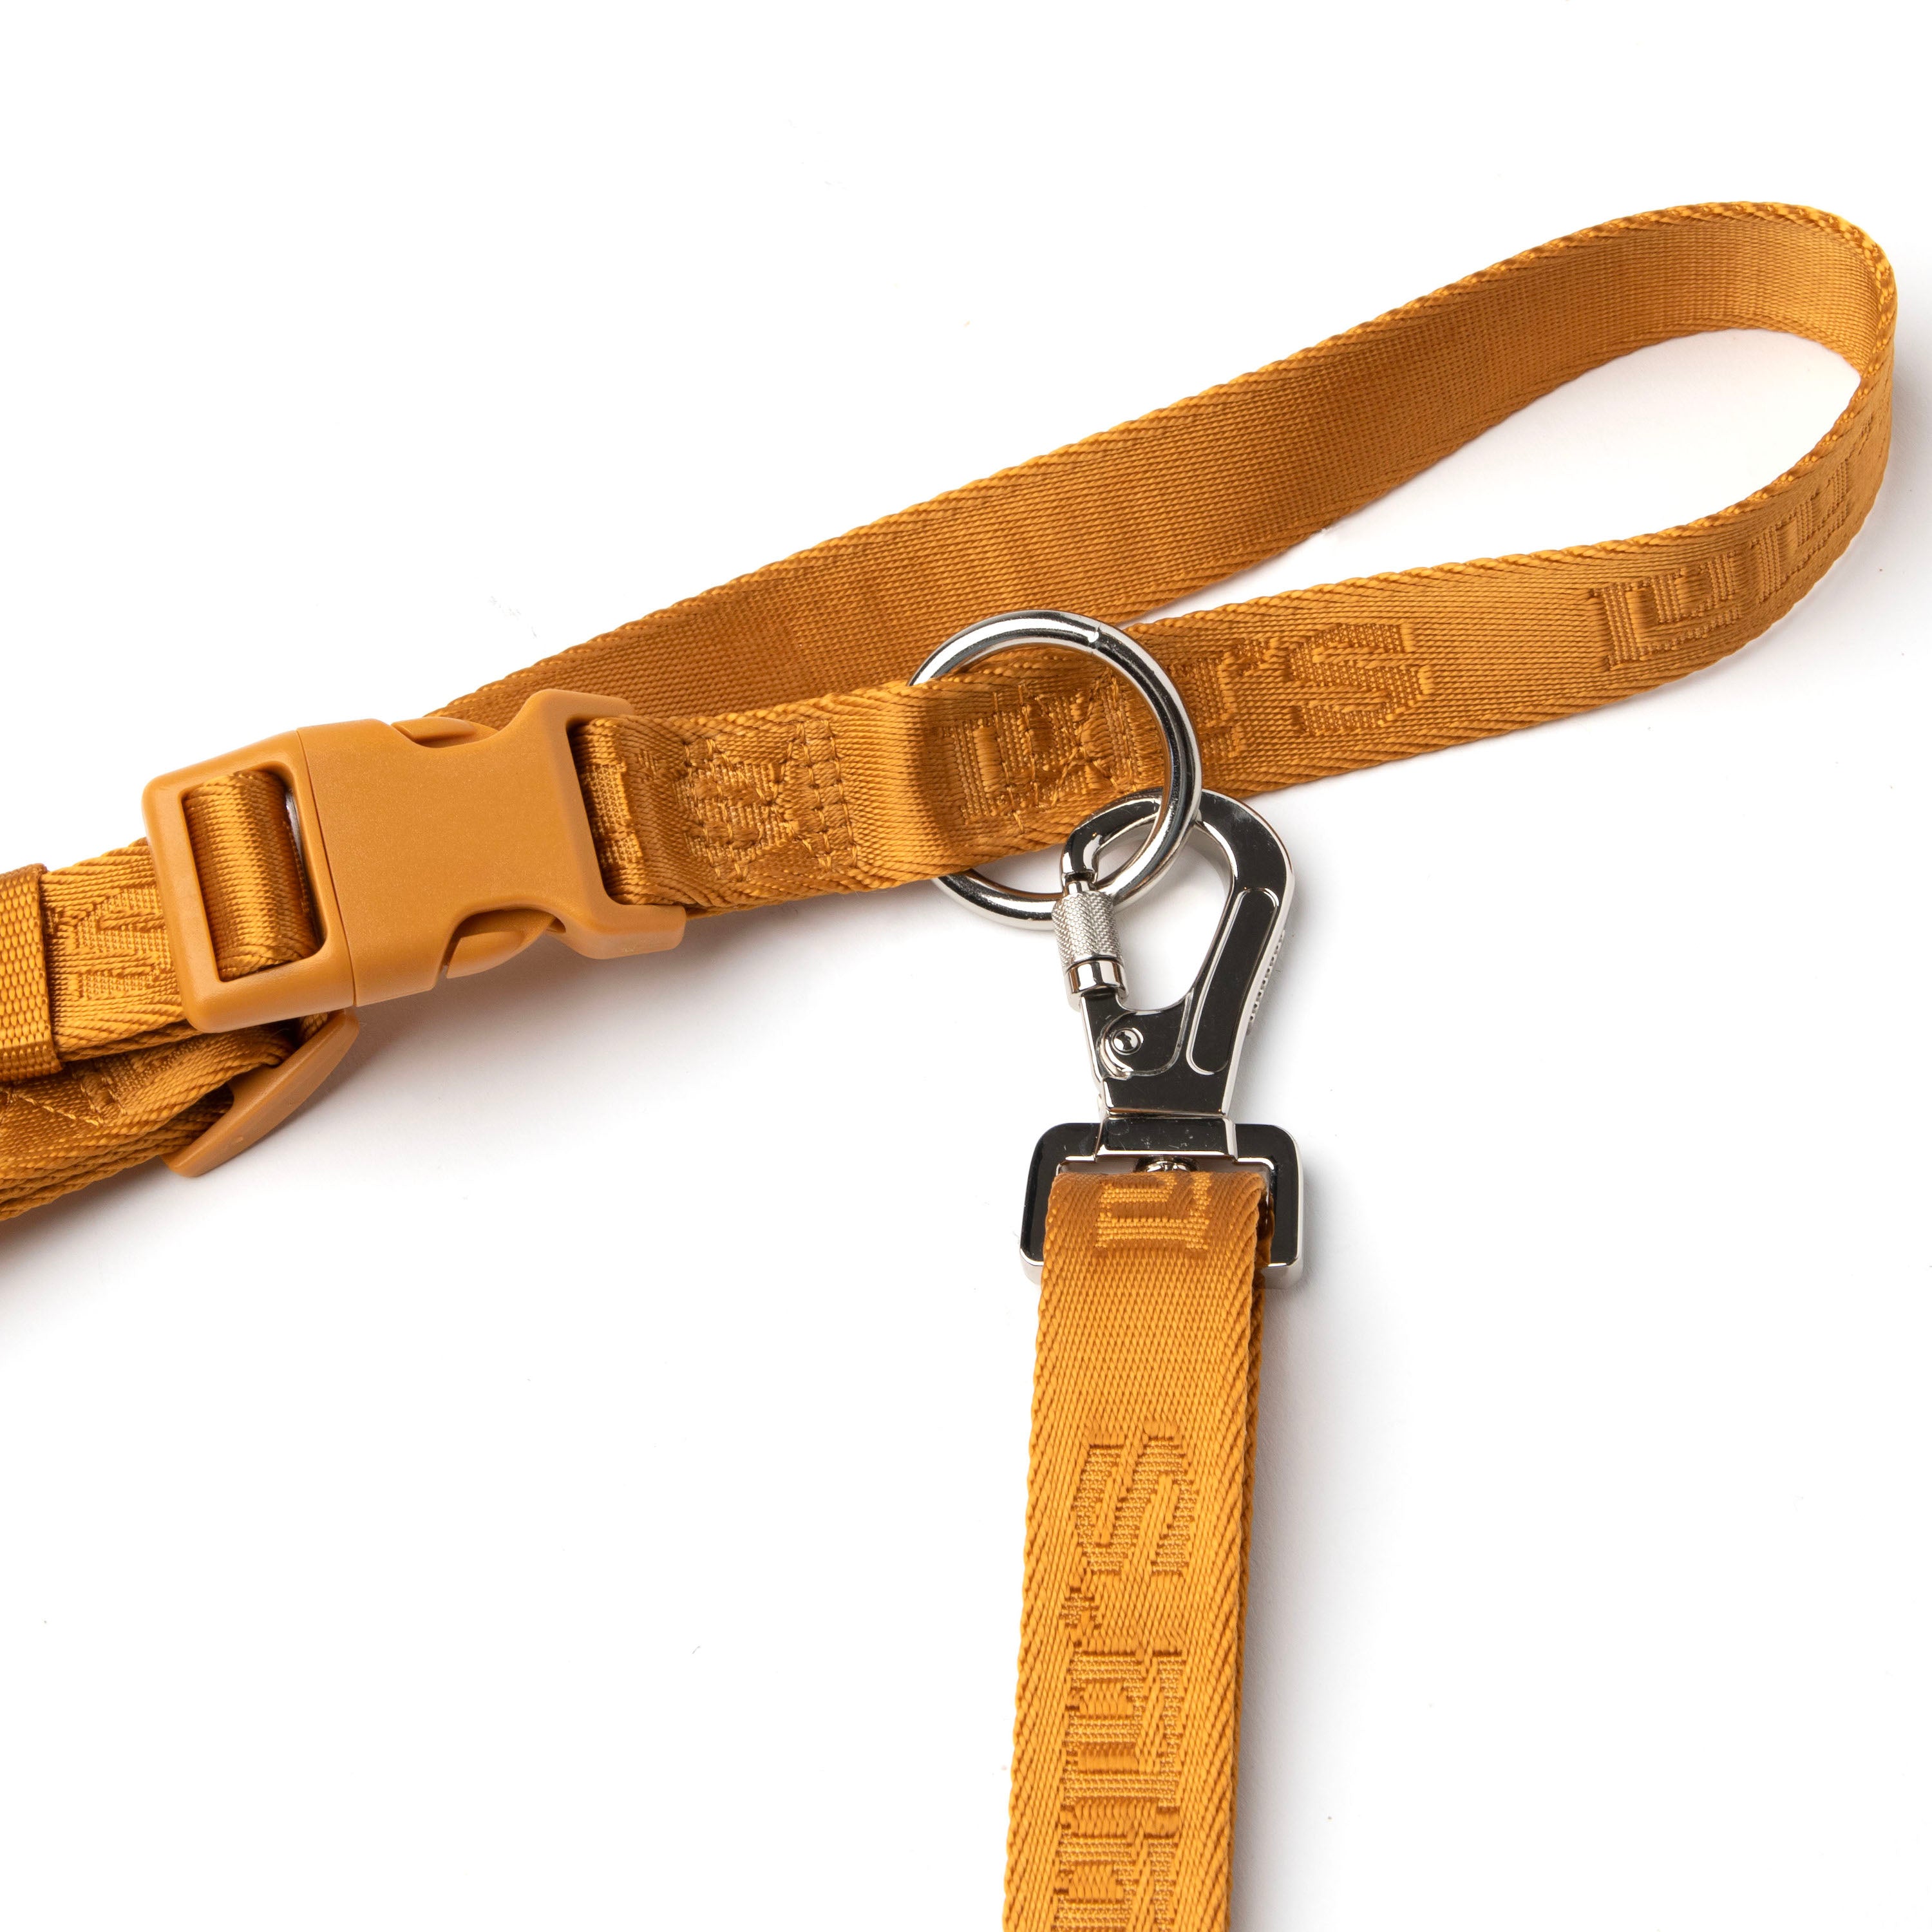 the Sand Orange Lulu's Leash and extension combines durability, comfort, style, and  safety into one high-quality product